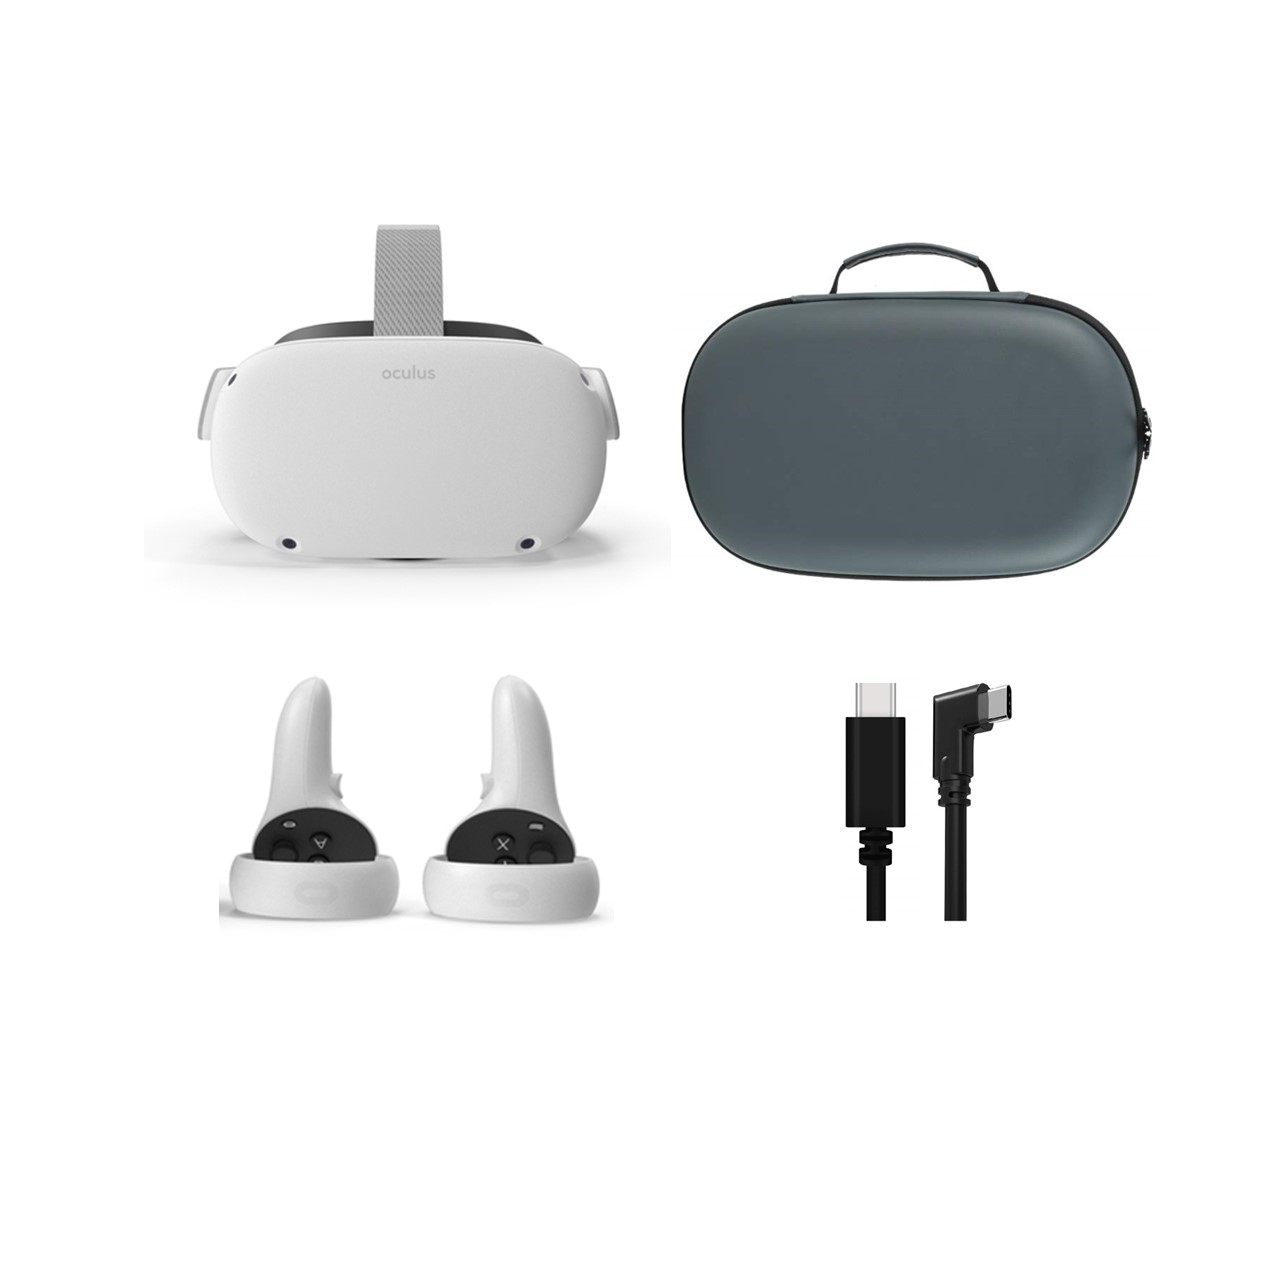 2021 Oculus Quest 2 All-In-One VR Headset, Touch Controllers, 128GB SSD, 1832x1920 up to 90 Hz Refresh Rate LCD, 3D Audio, Mytrix Carrying Case, USB-C PC VR Cable (3M) - image 1 of 7